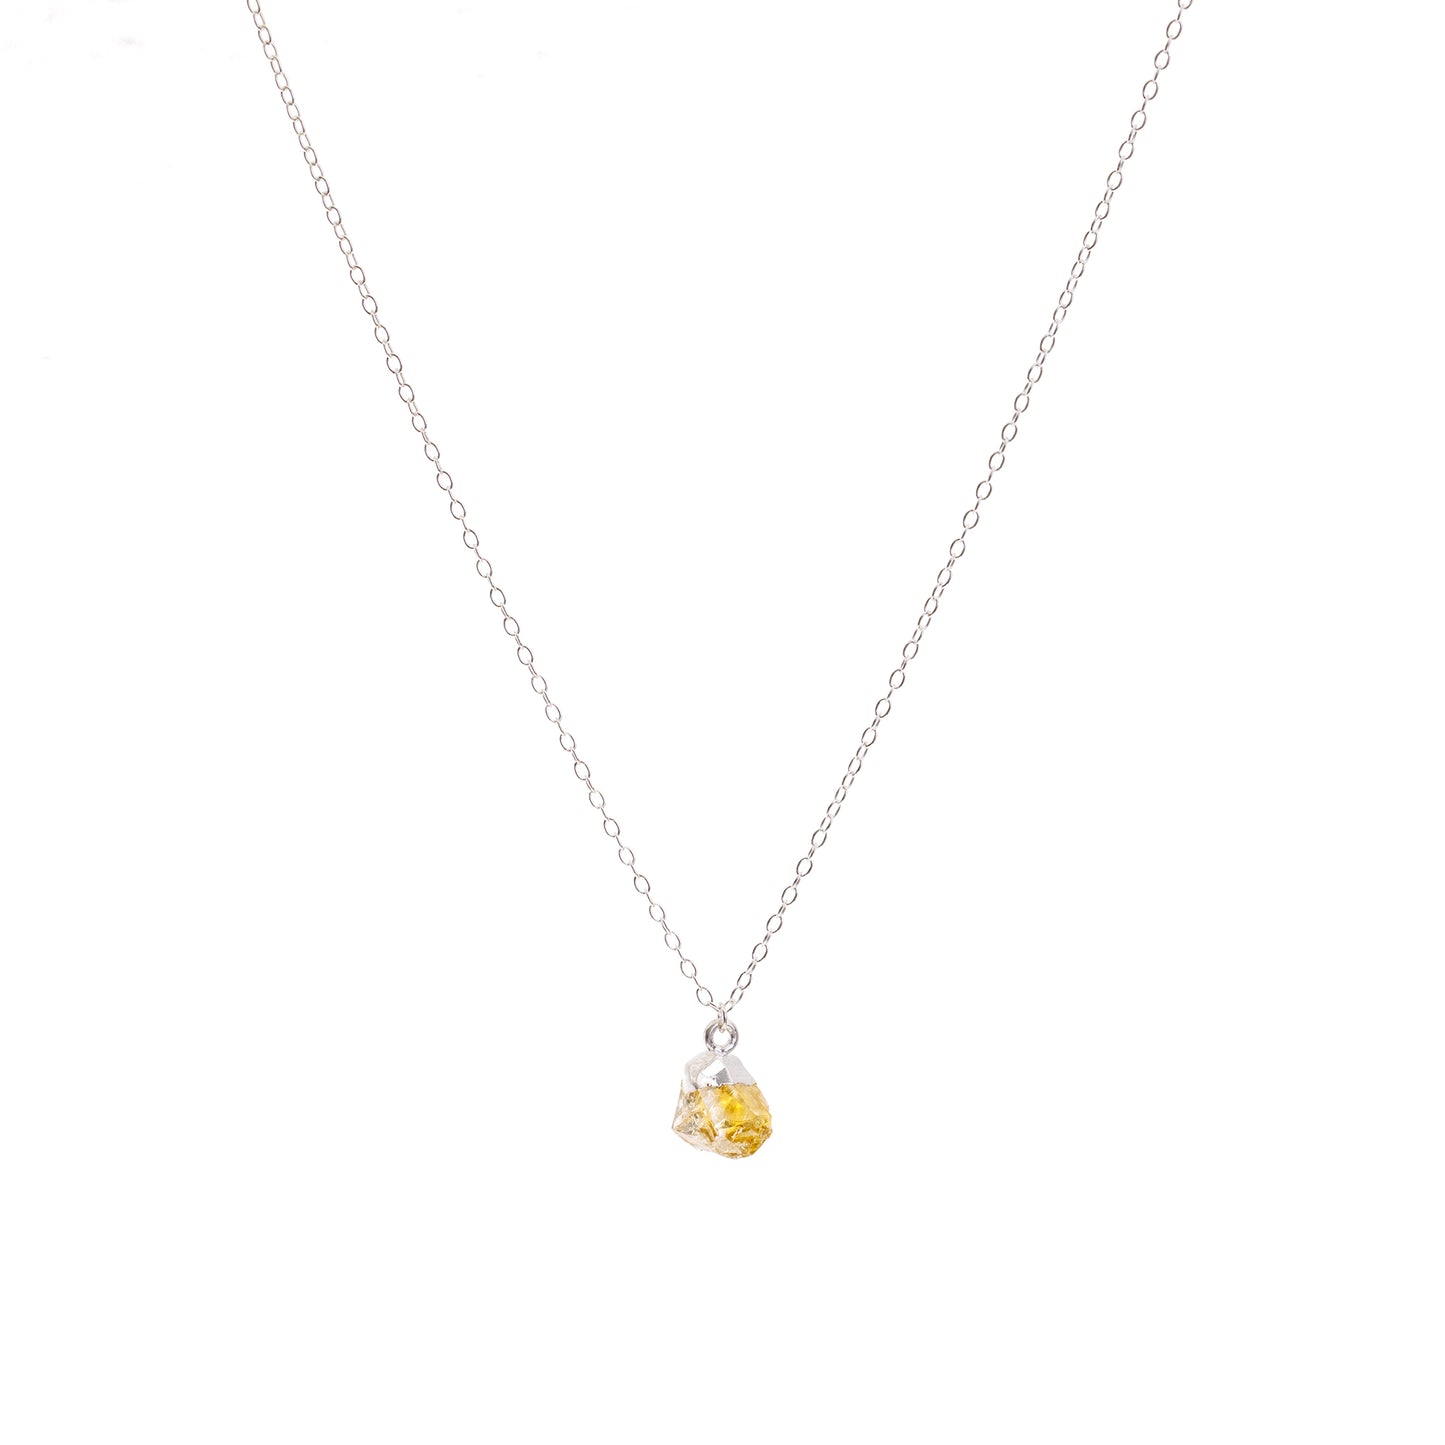 Silver Citrine Raw Crystal Necklace